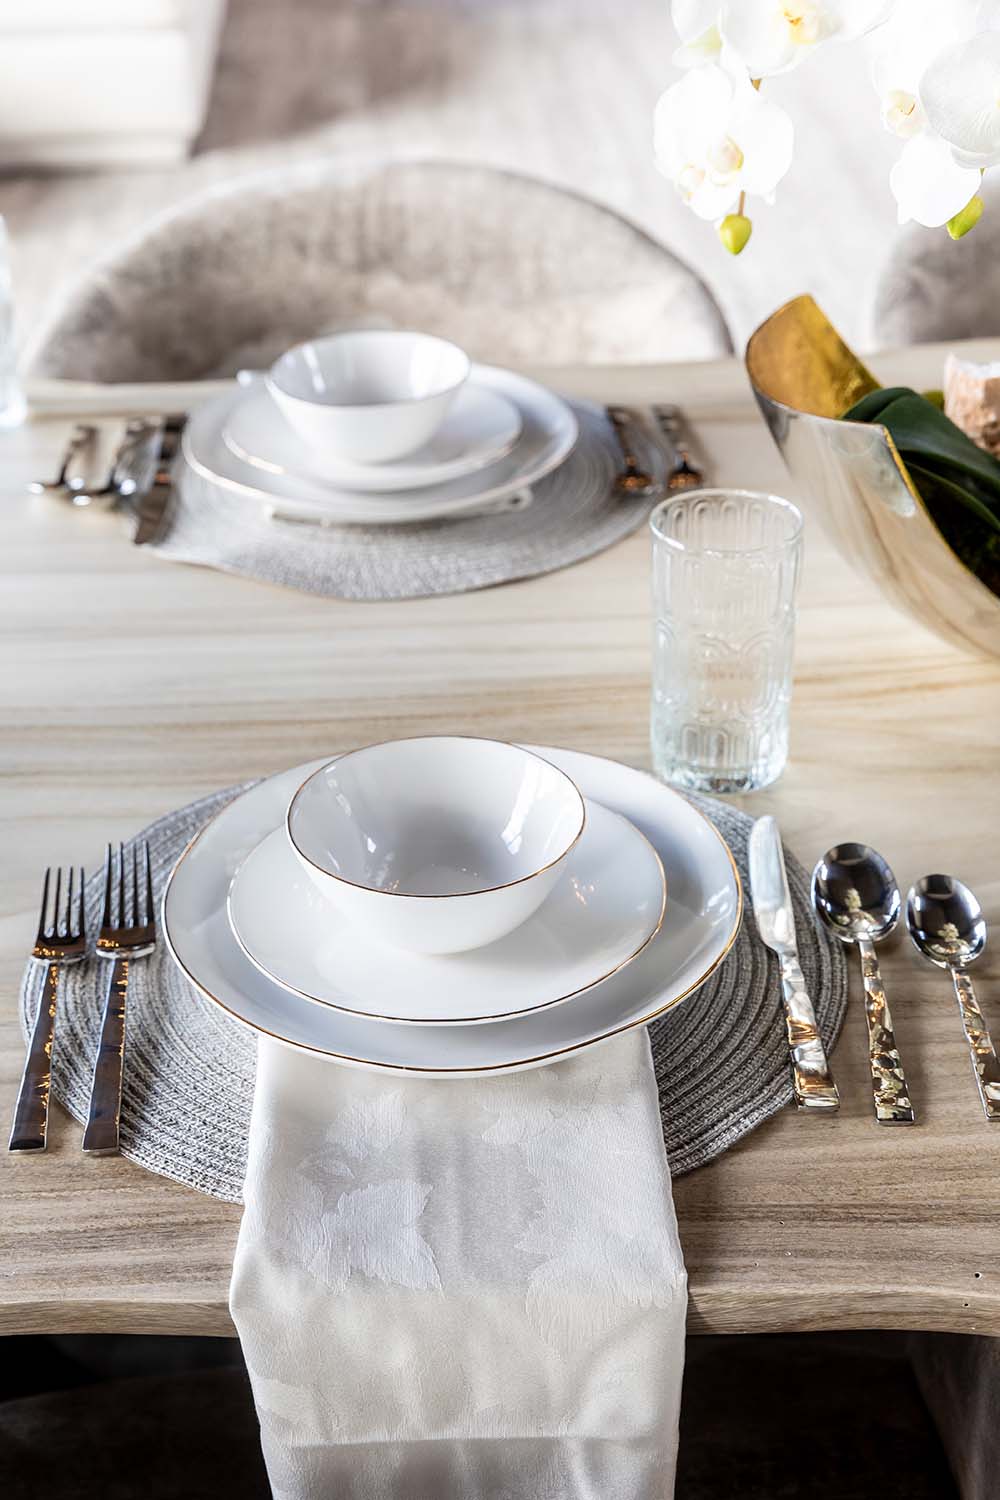 Simple and Classic tablesetting ideas by Bond Design Company